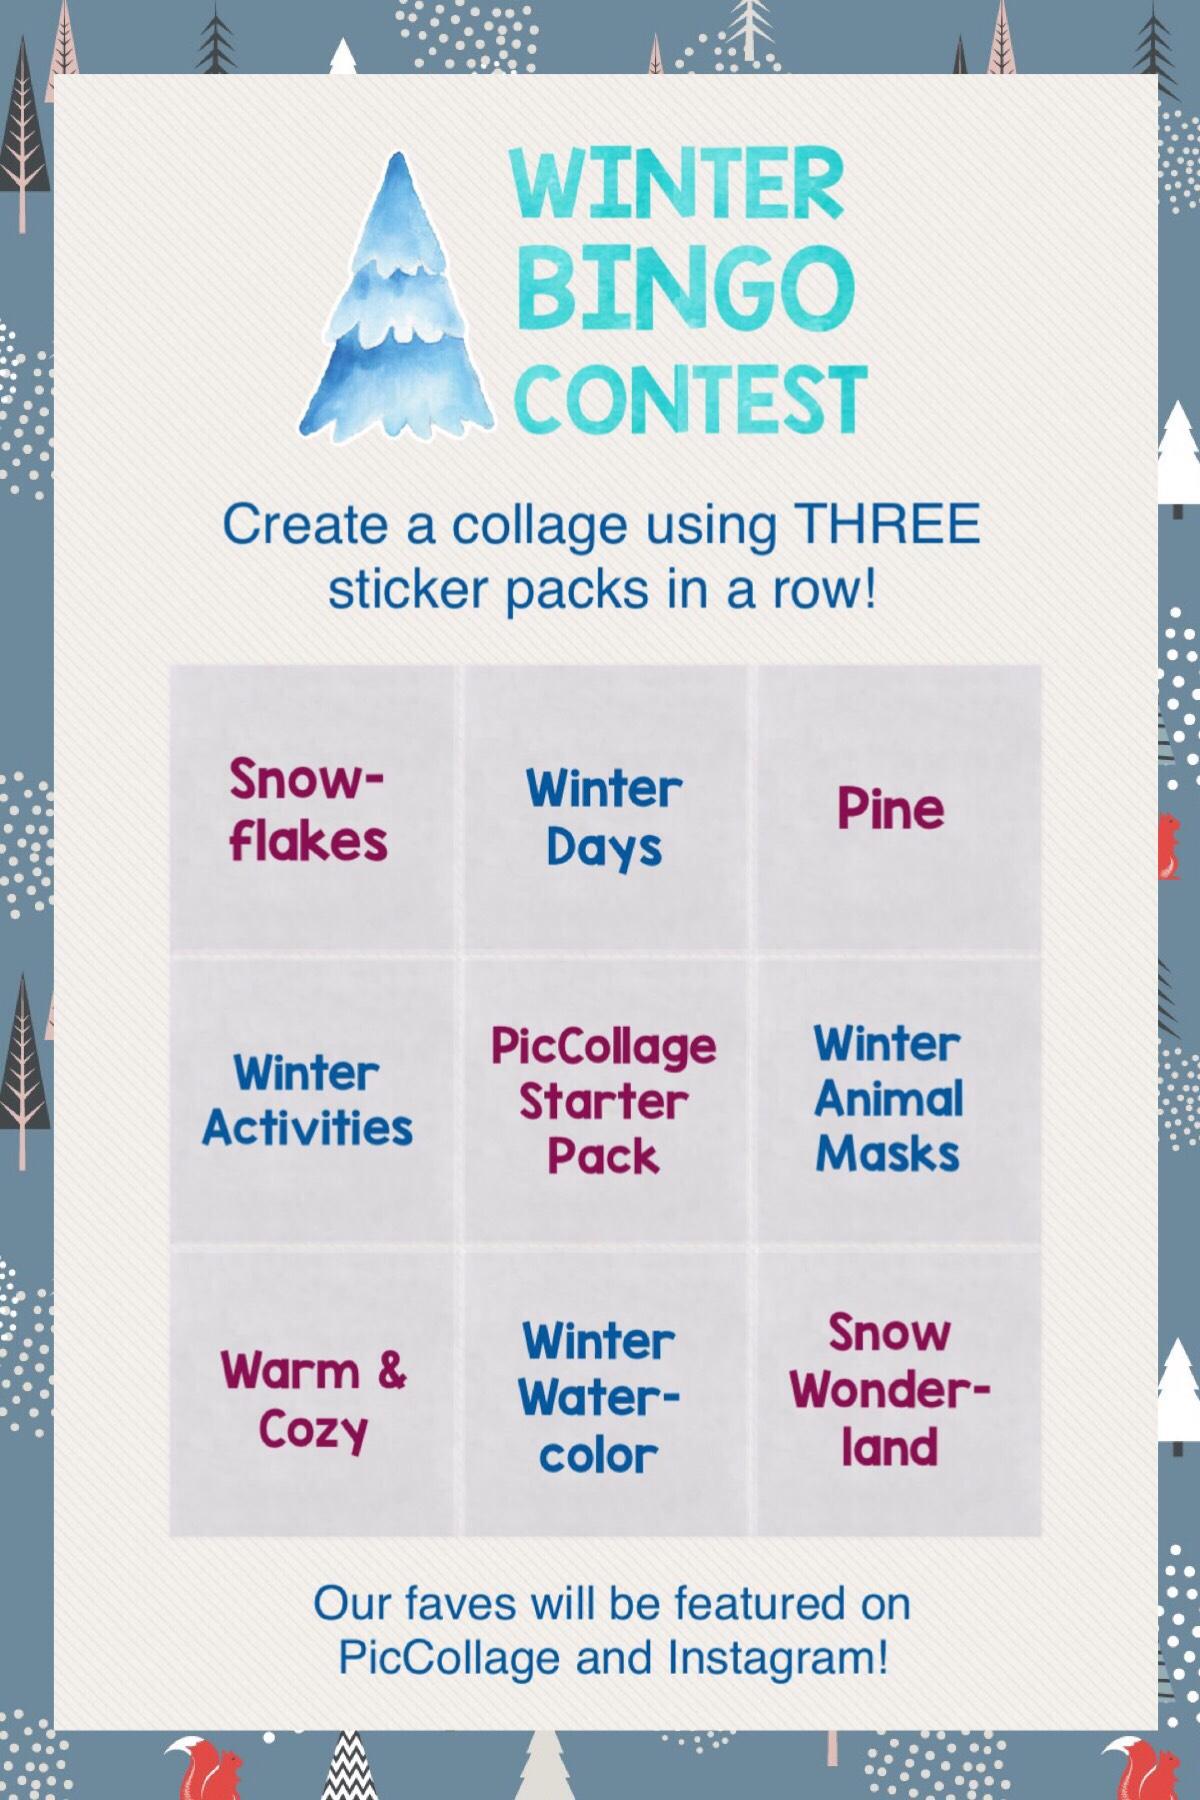 Use any THREE sticker packs in a row (horizontal / vertical / diagonal) to create a collage! Deadline is December 13, 2018! ❄️